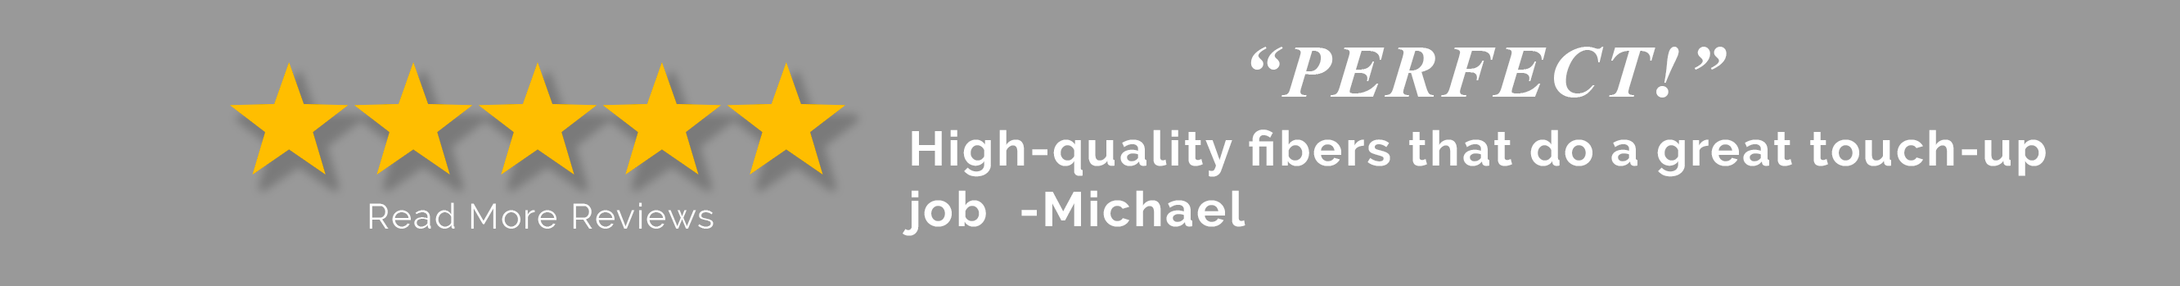 5 star customer Review:  Perfect! High quality fibers that do a great touch-up job. Michael. 